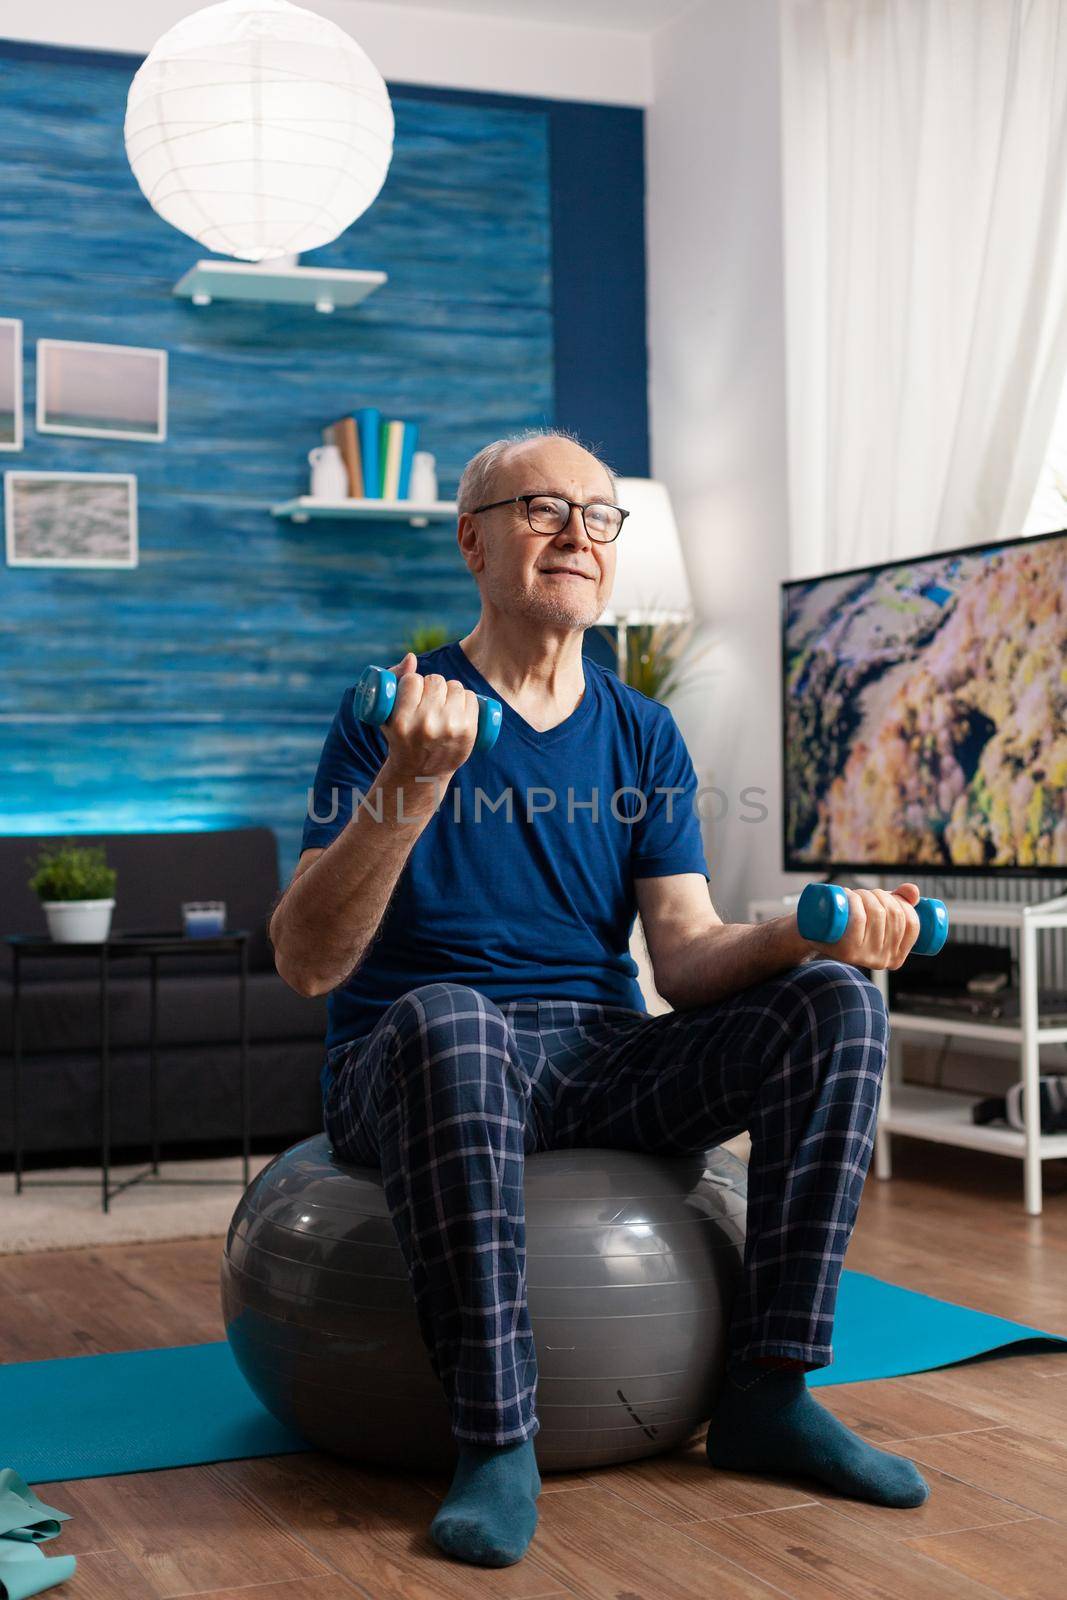 Retirement senior man sitting on swiss ball exercising arms muscles doing fitness exercises using workout dumbbells. Focused pensioner training body strength resistance in living room